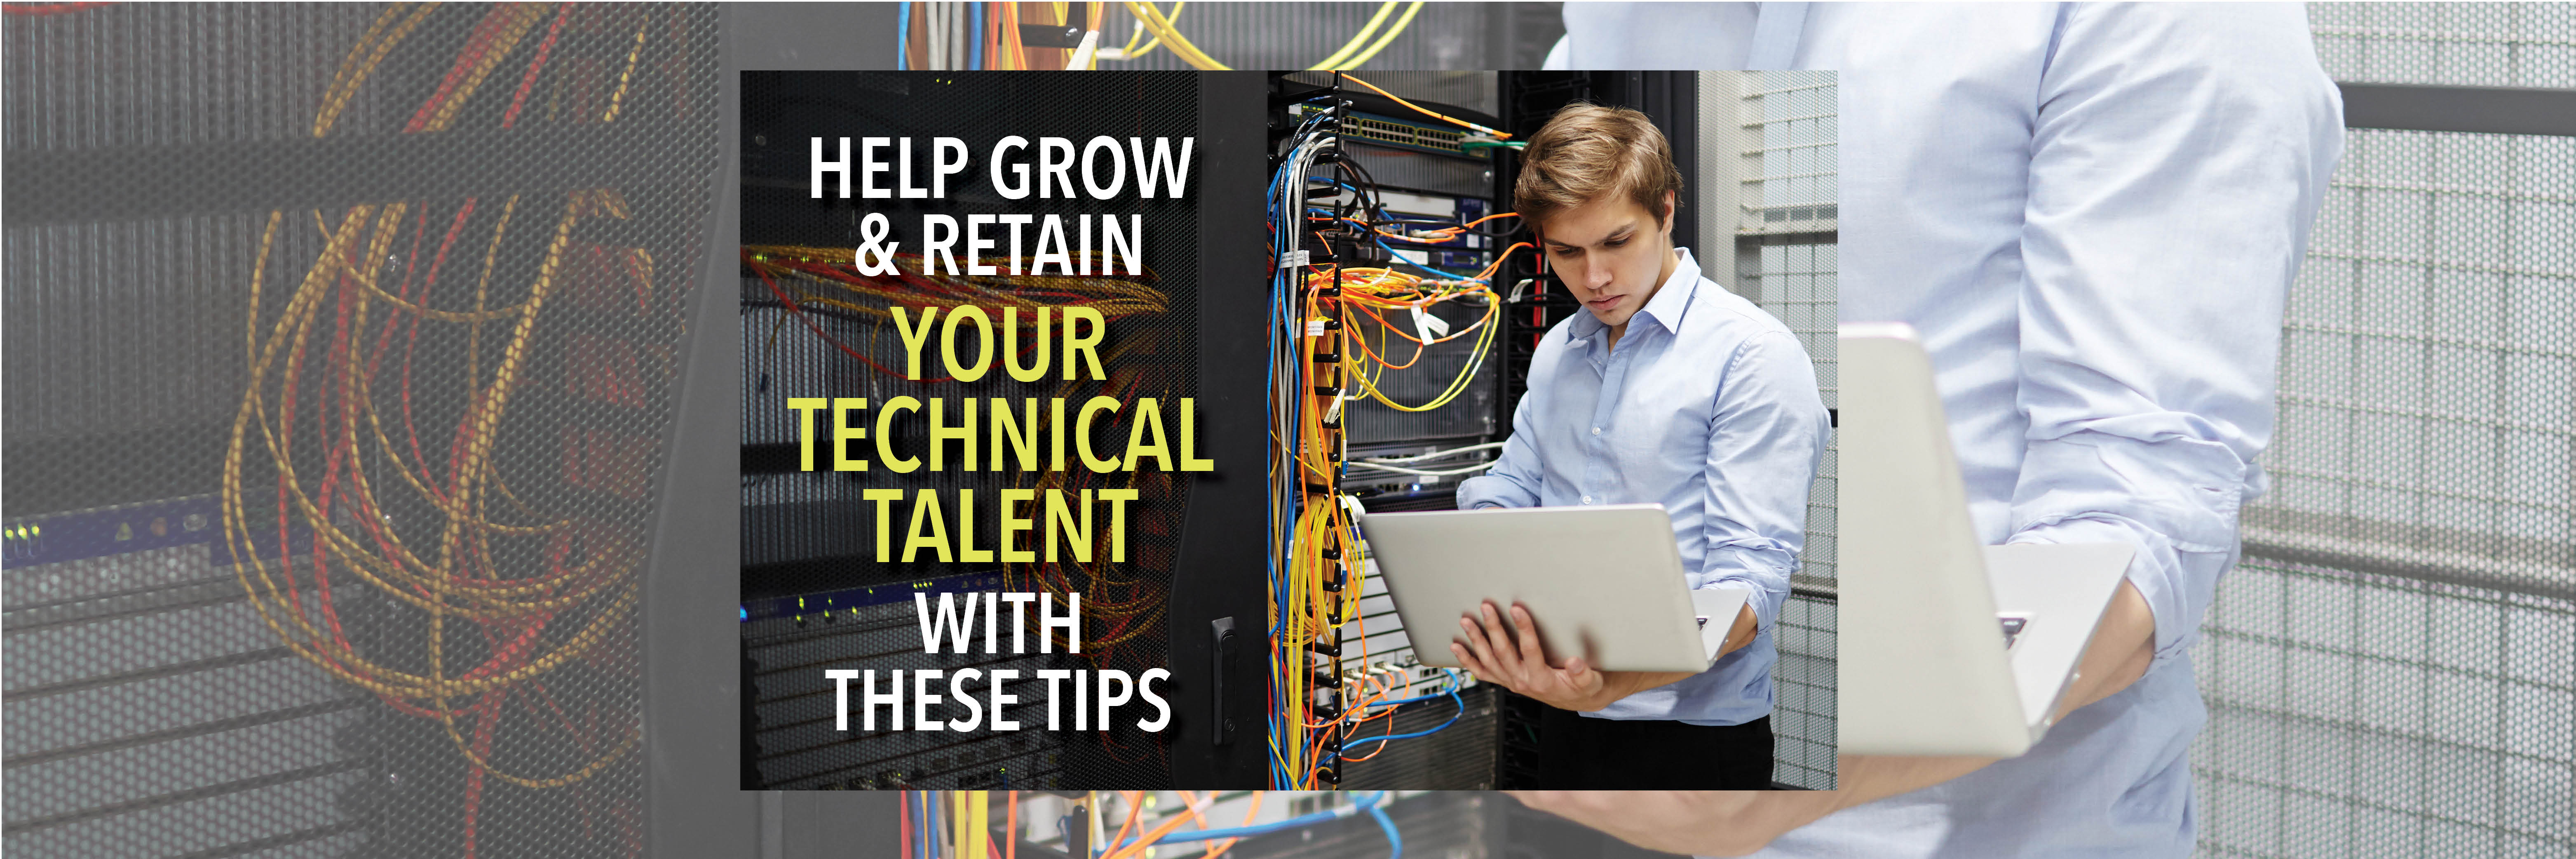 Help Grow and Retain Your Technical Talent With These Tips